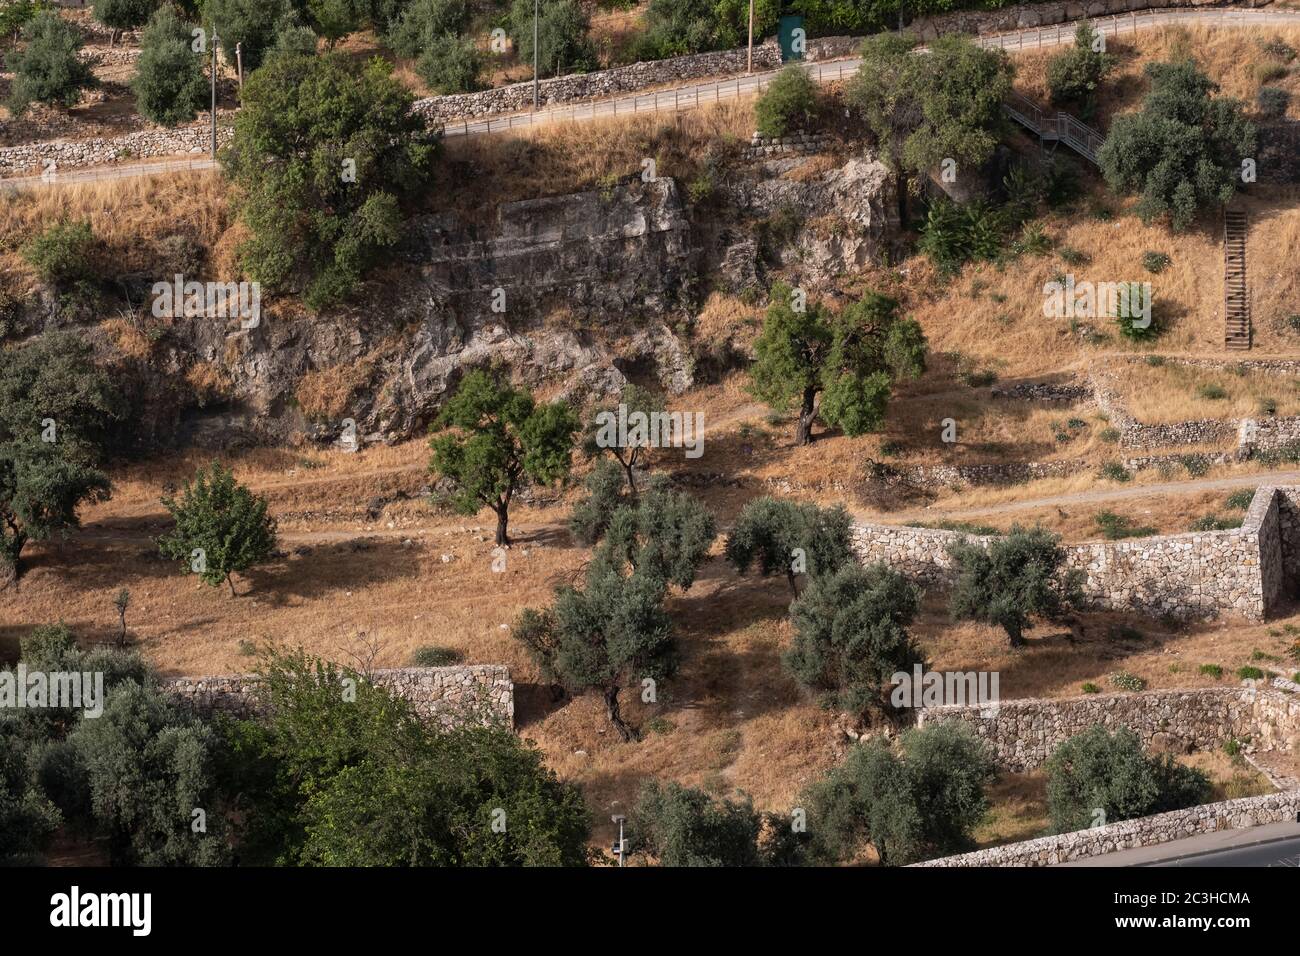 View of Valley of Hinnom or Gei Ben Hinom Valley Park the modern name for the biblical Gehenna or Gehinnom valley surrounding Jerusalem's Old City, Israel Stock Photo